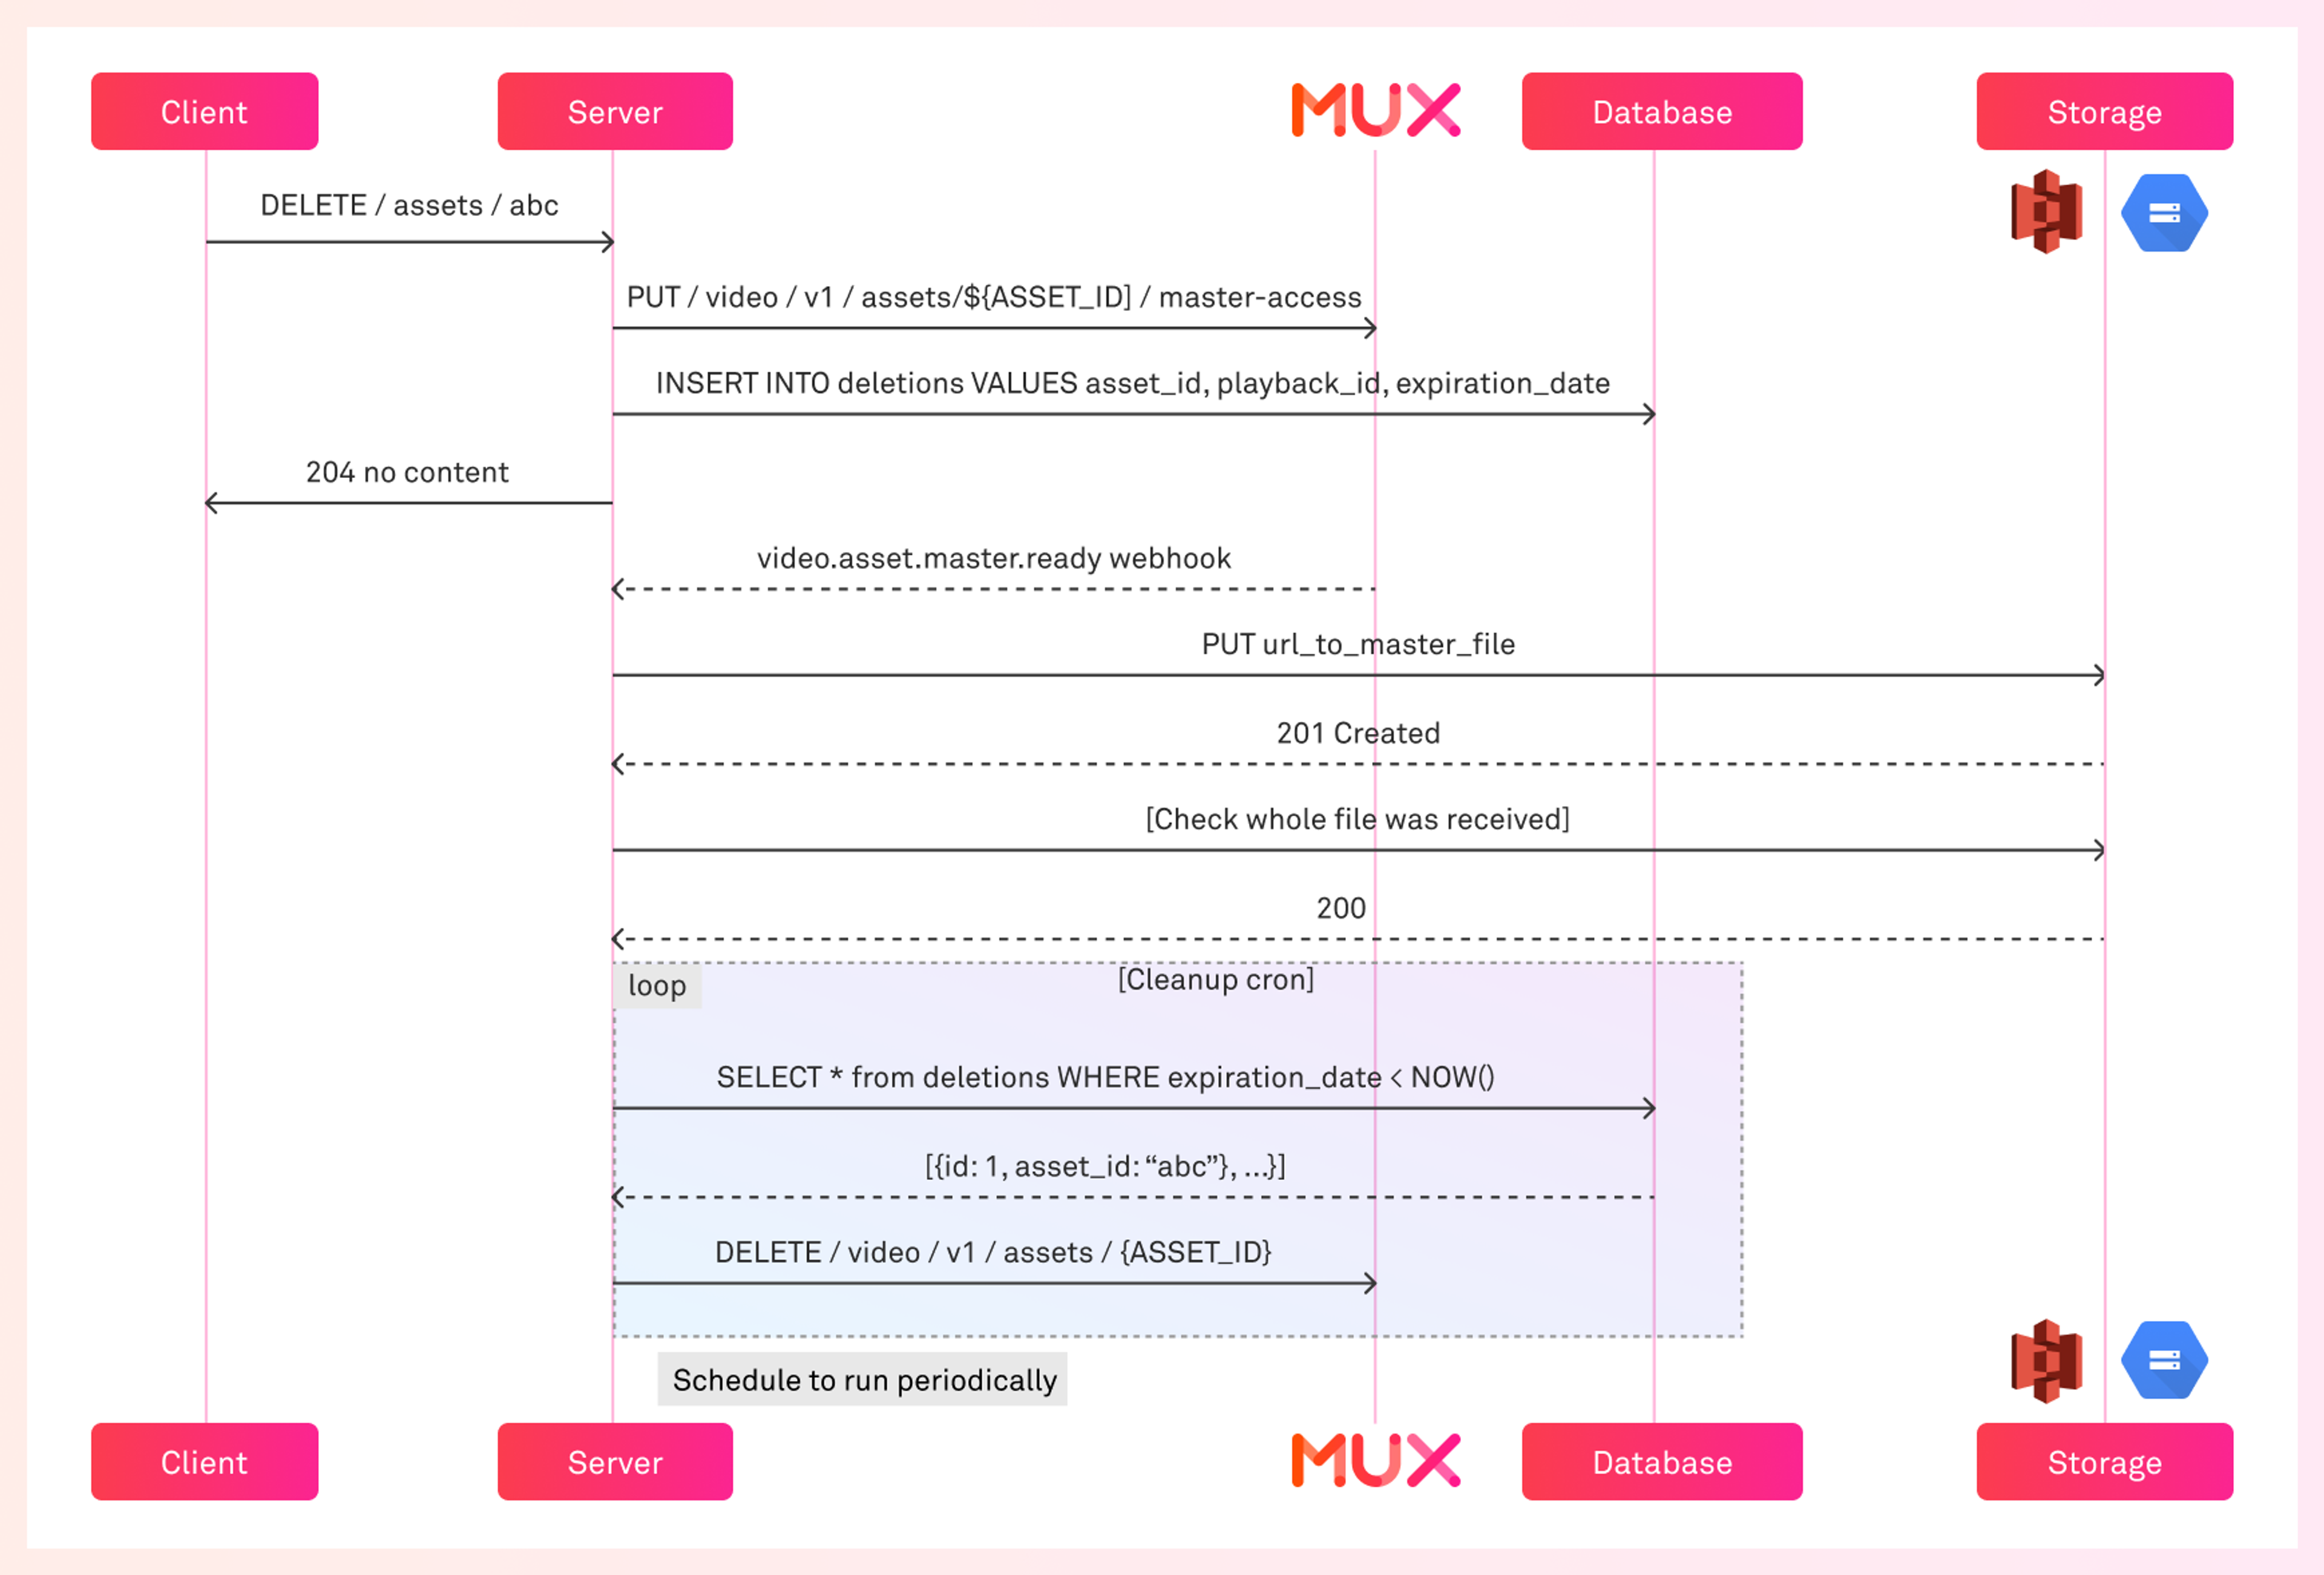 A sequence diagram demonstrating an example workflow for moving Mux assets to cold storage.